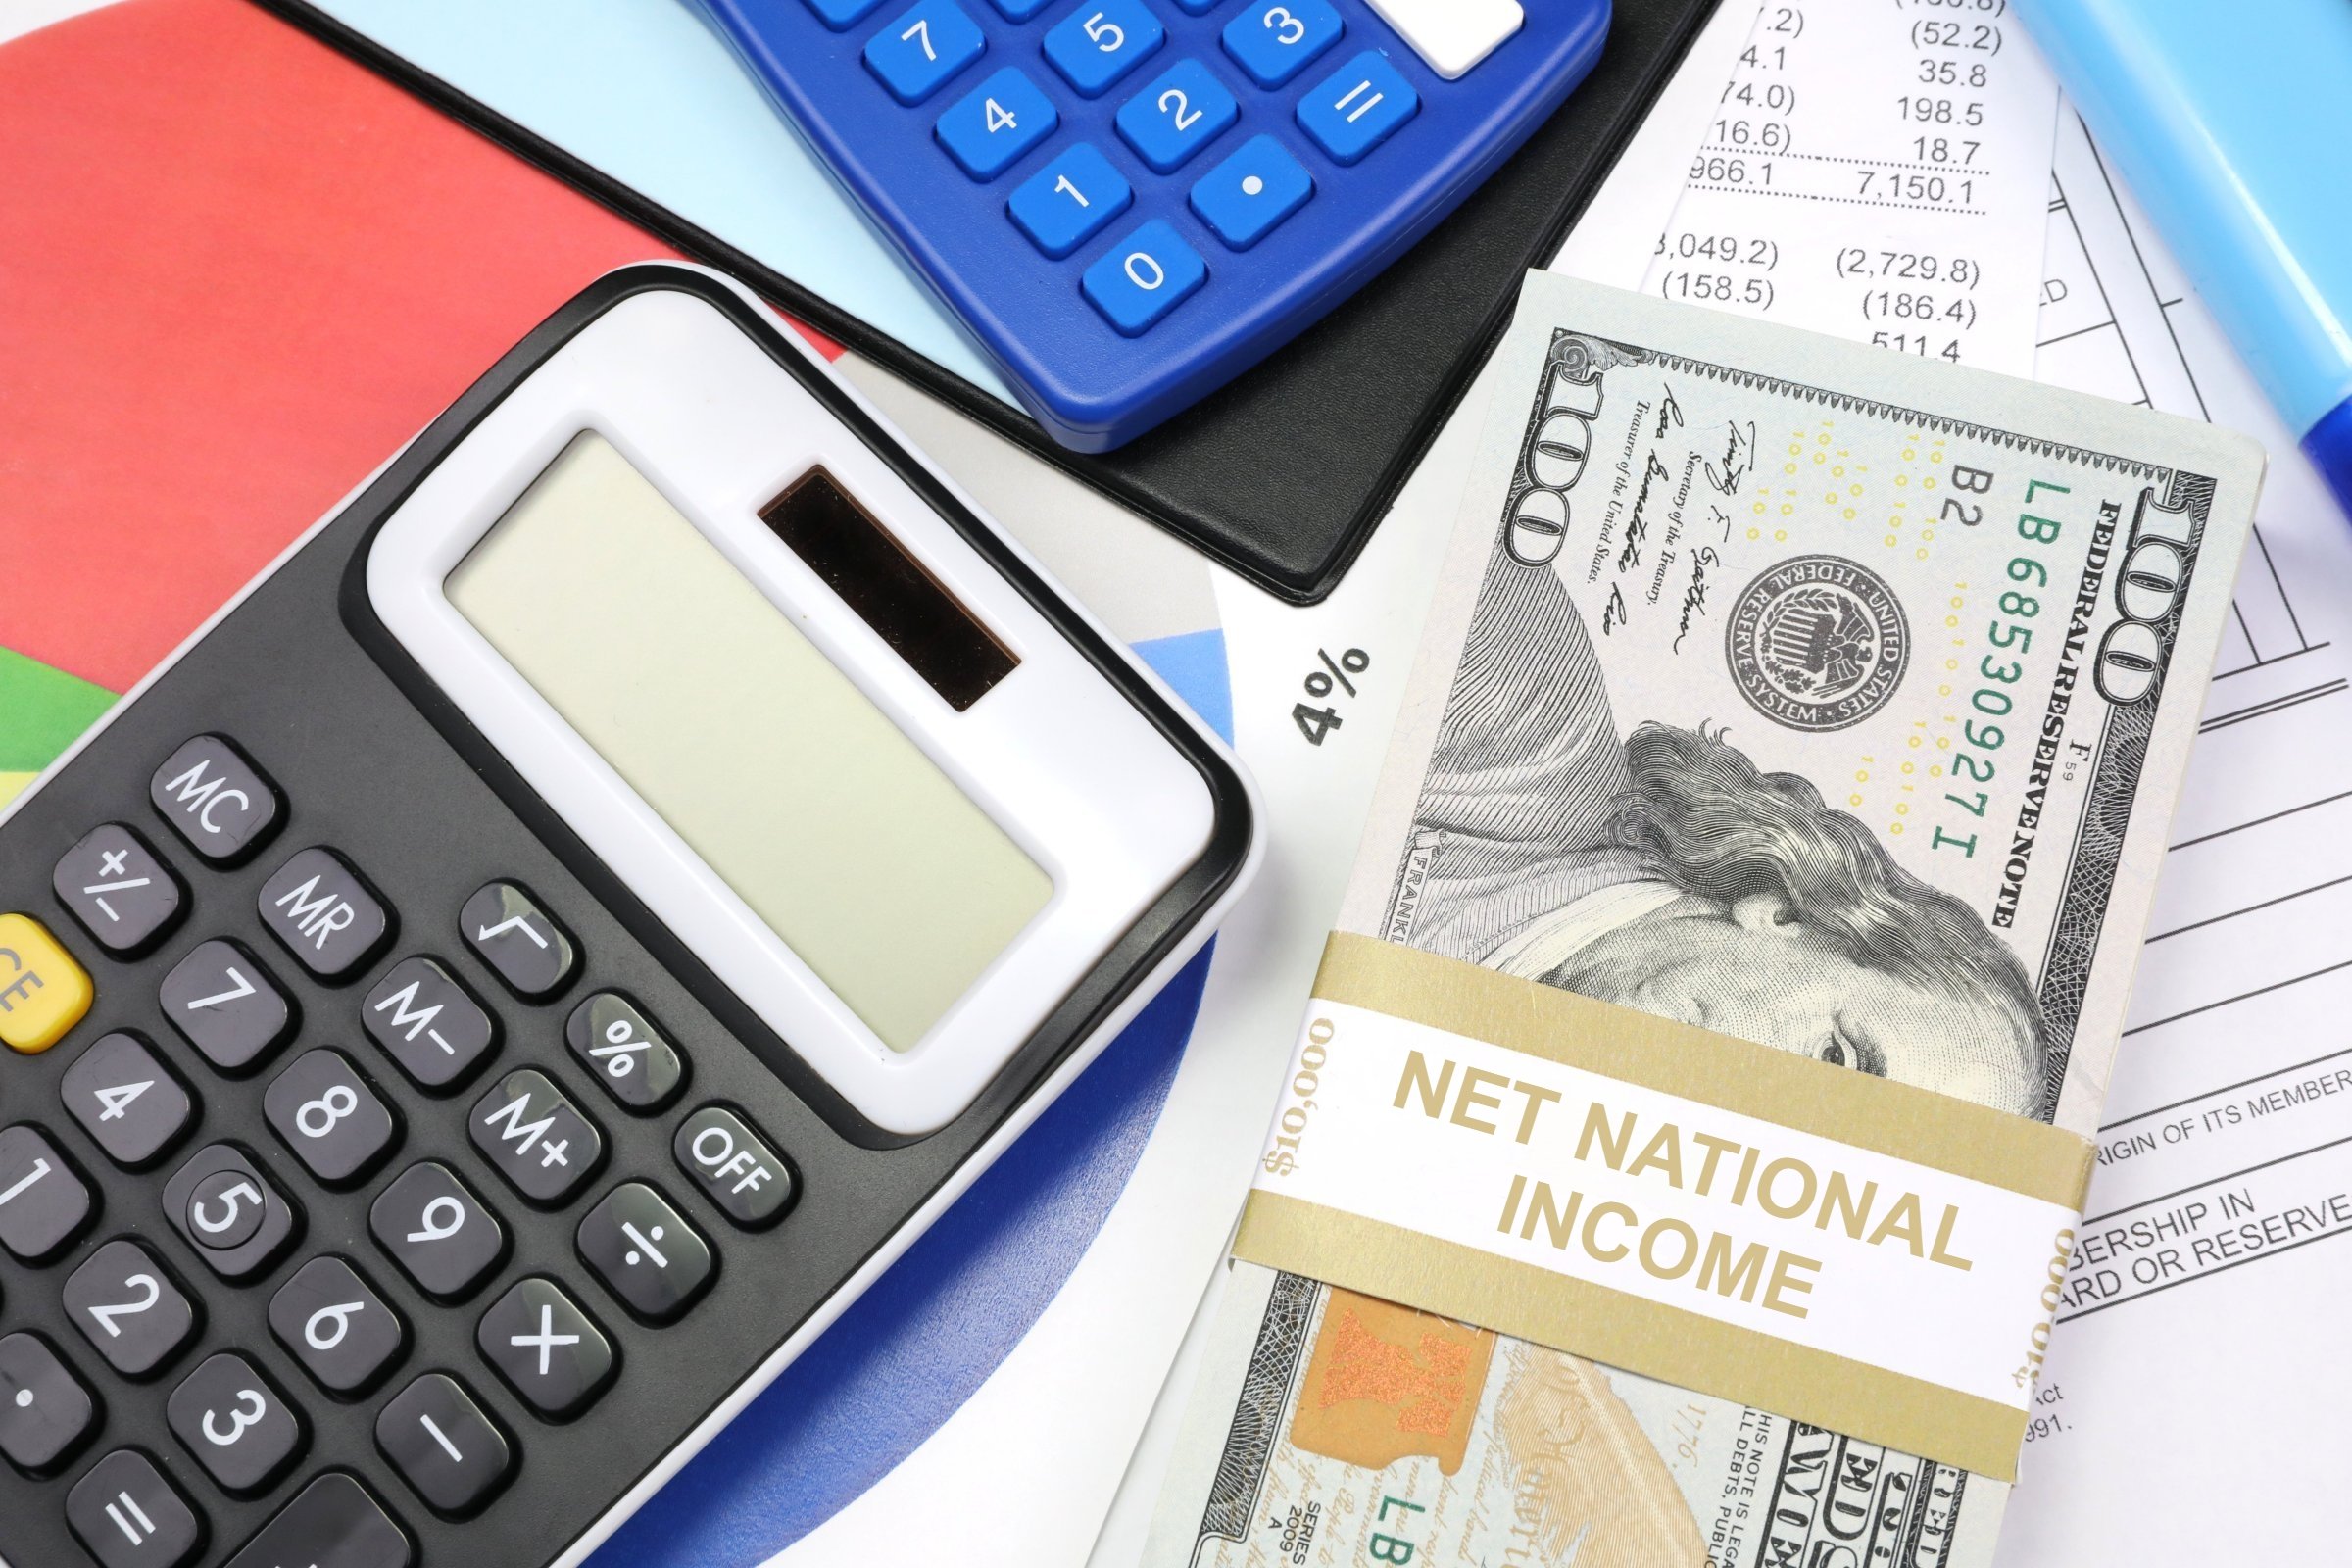 Net National Income